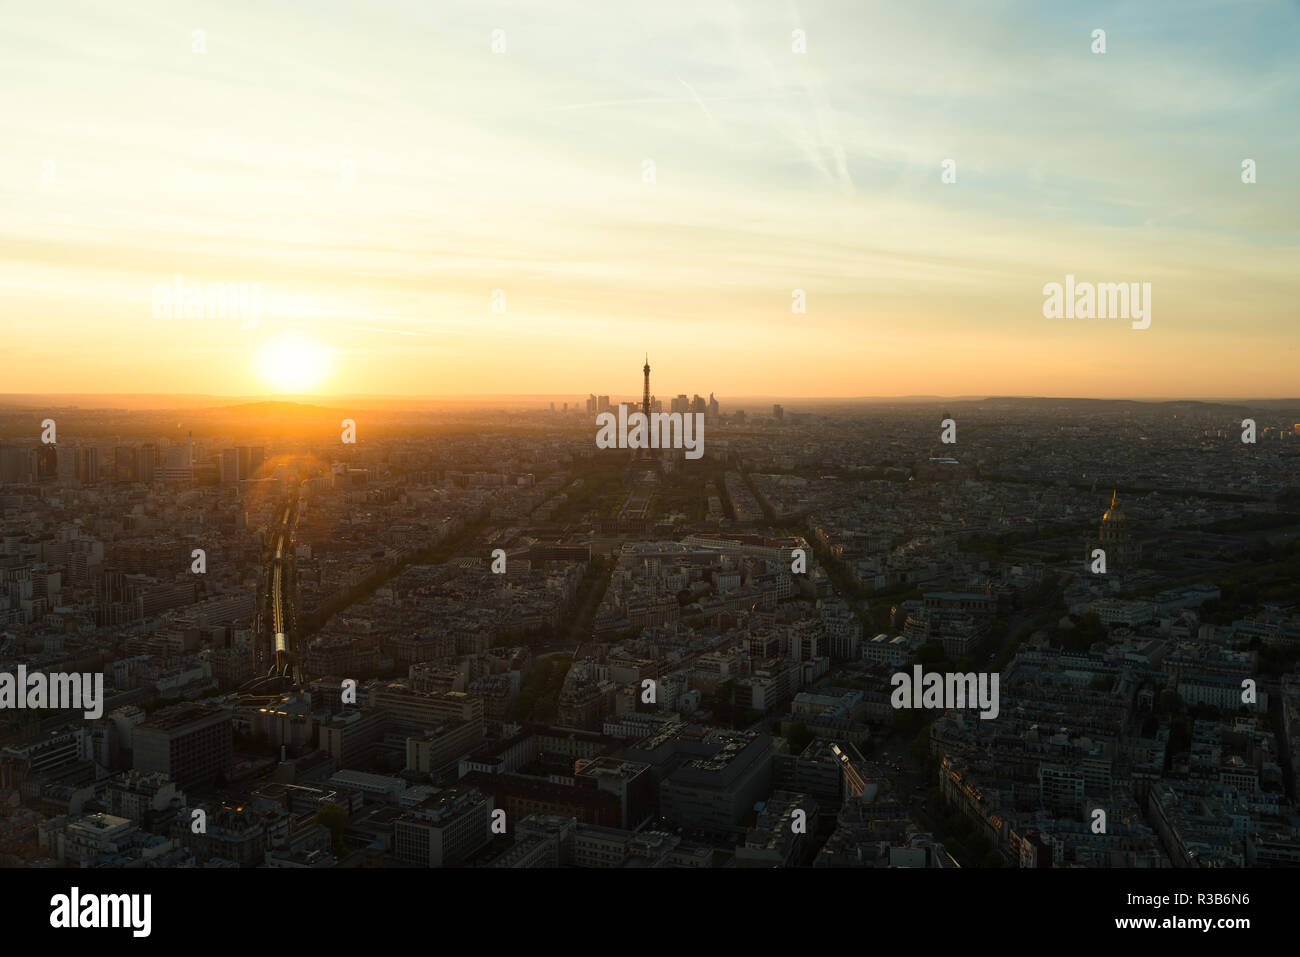 Aerial view of Paris skyline with Eiffel Tower at sunset. Eiffel Tower is one of the most iconic landmarks of Paris, France. Stock Photo